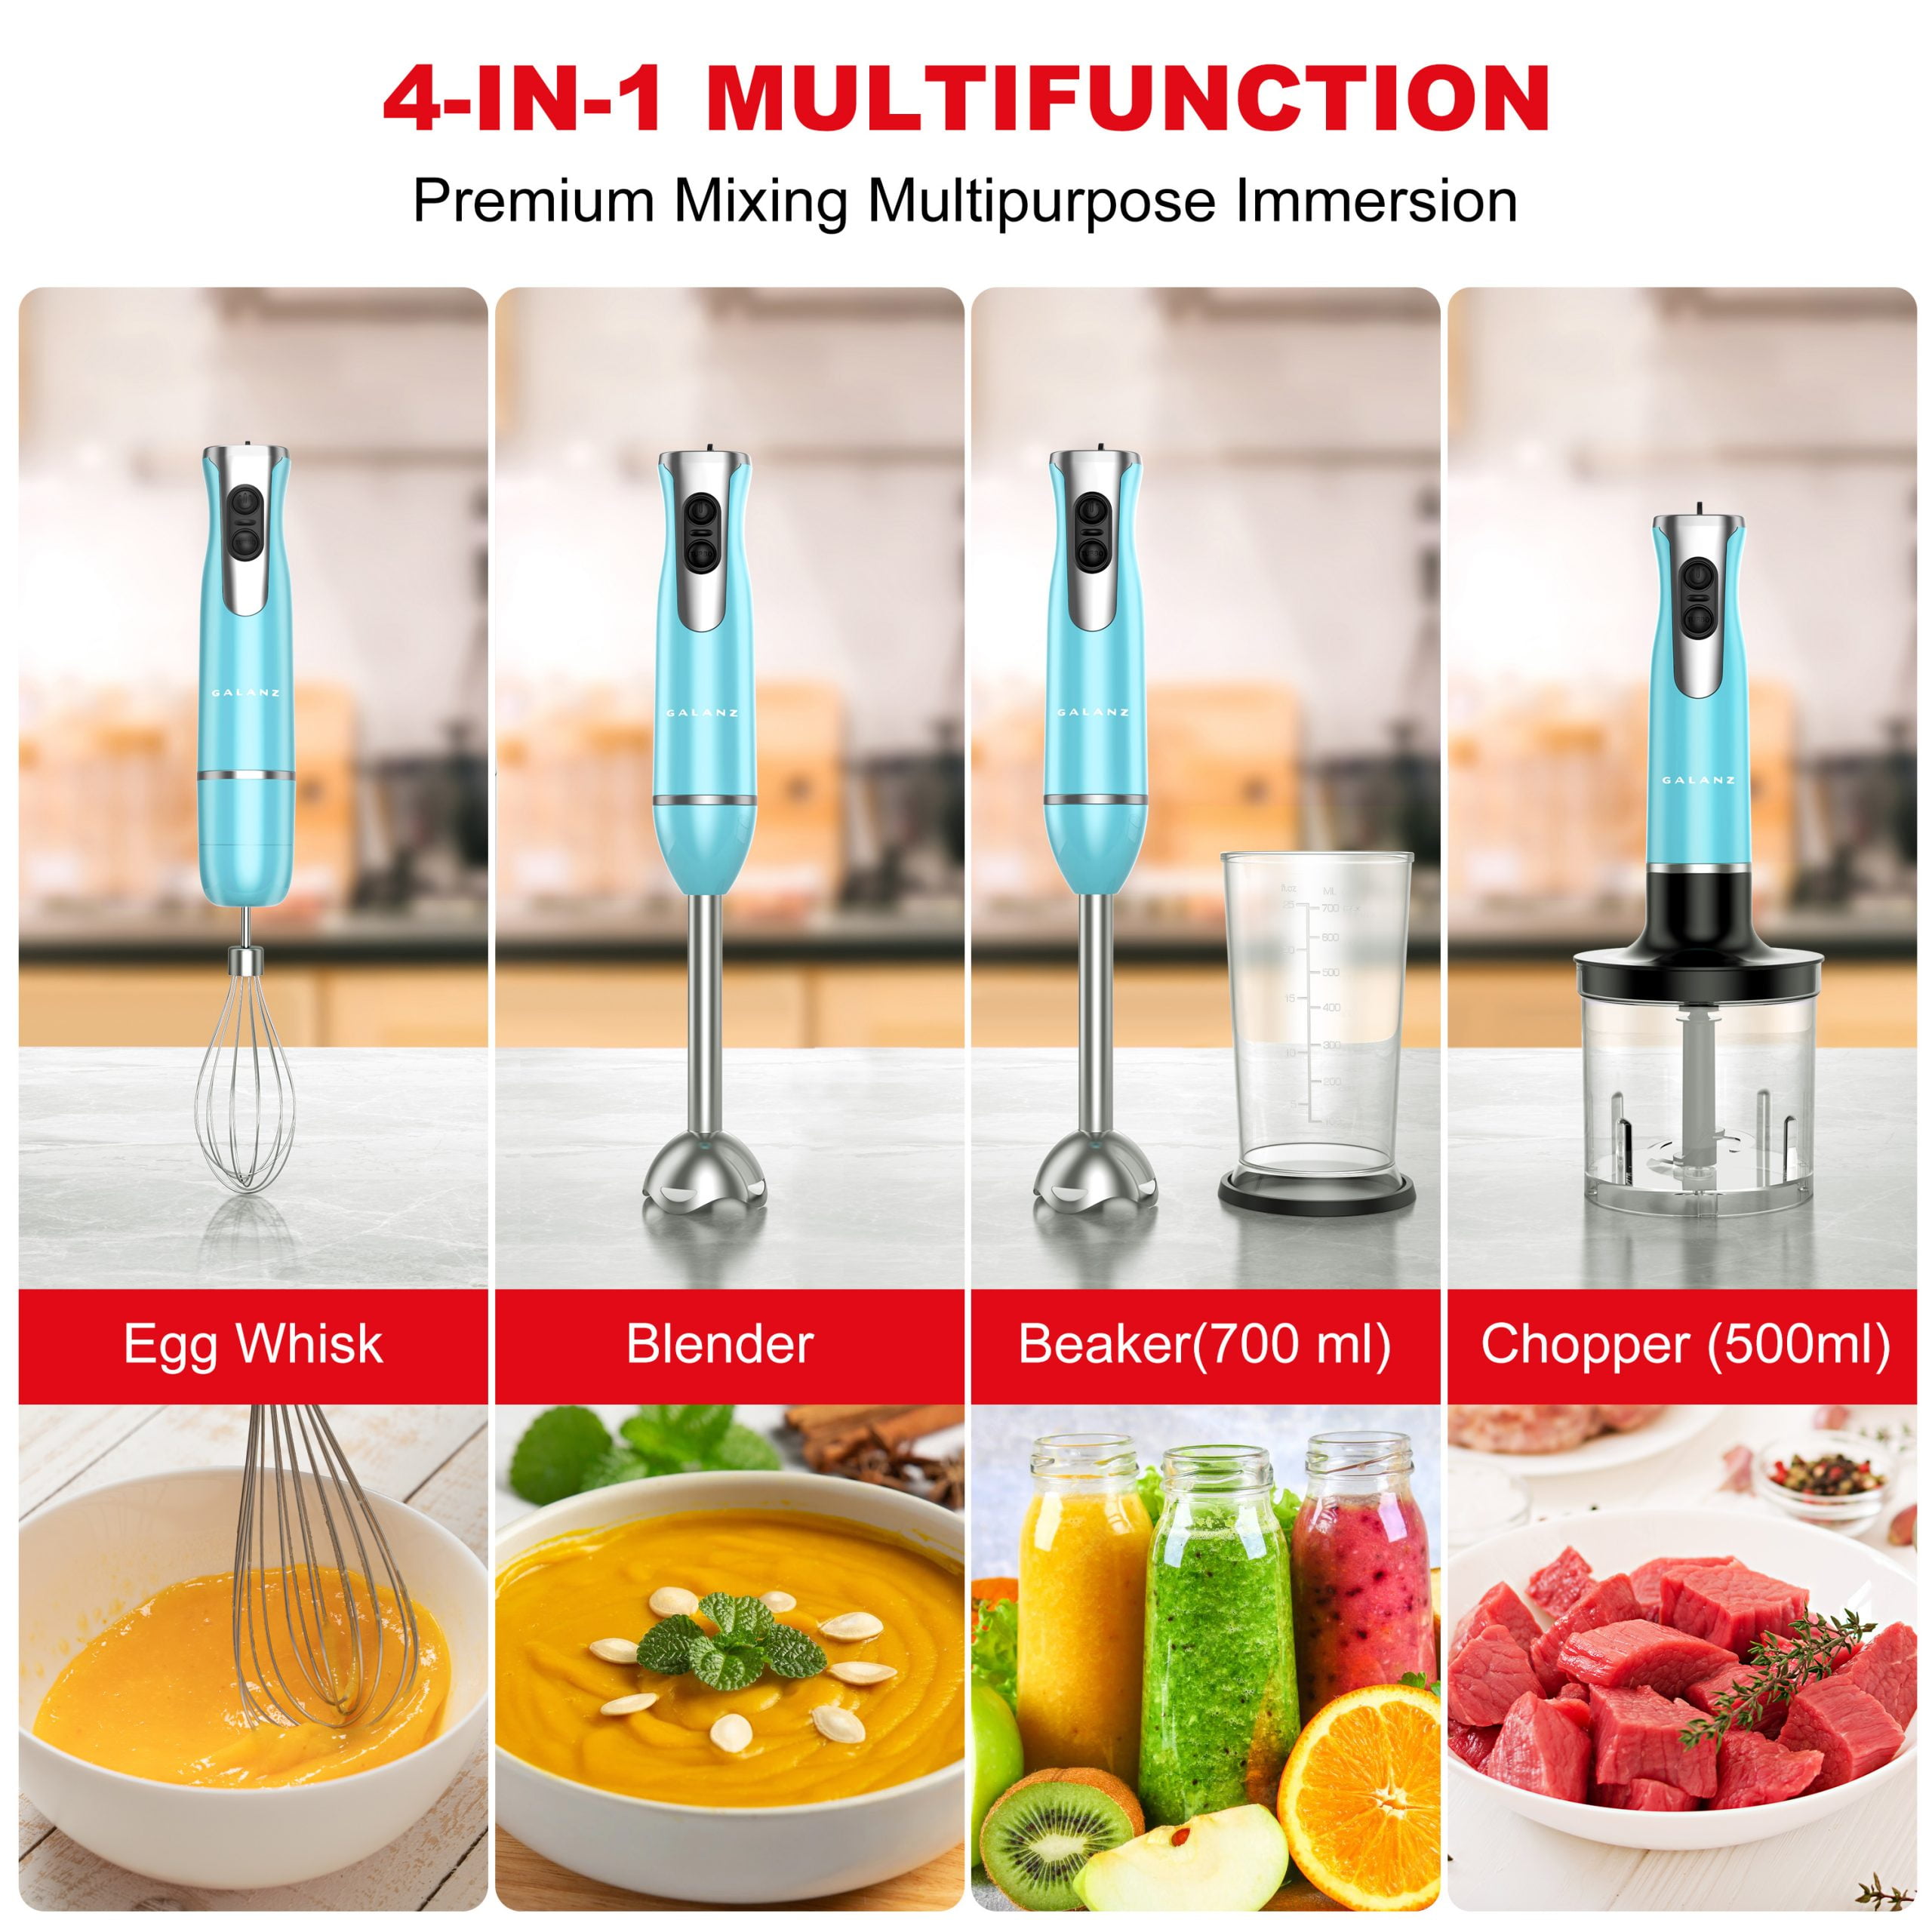 2-Speed Retro Blue Immersion Blender with Whisk and Chopper Attachments